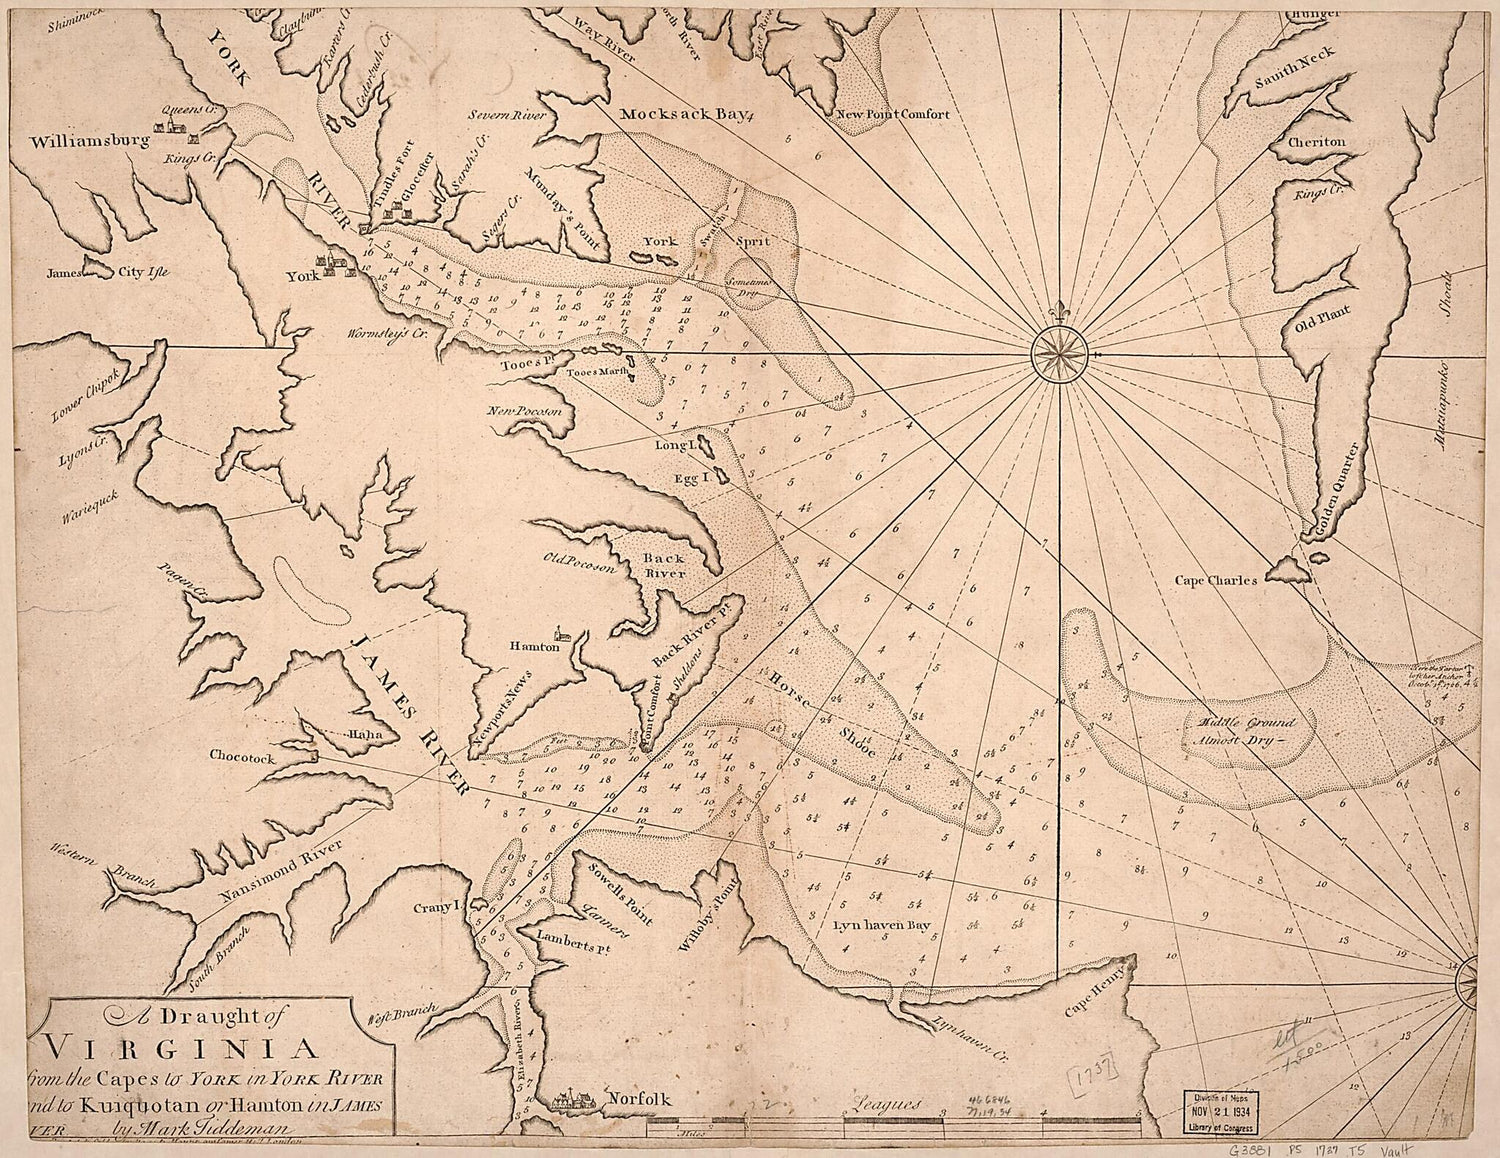 This old map of A Draught of Virginia from the Capes to York In York River and to Kuiquotan Or Hamton In James River from 1737 was created by Mark Tiddeman,  W. Mount and T. Page in 1737